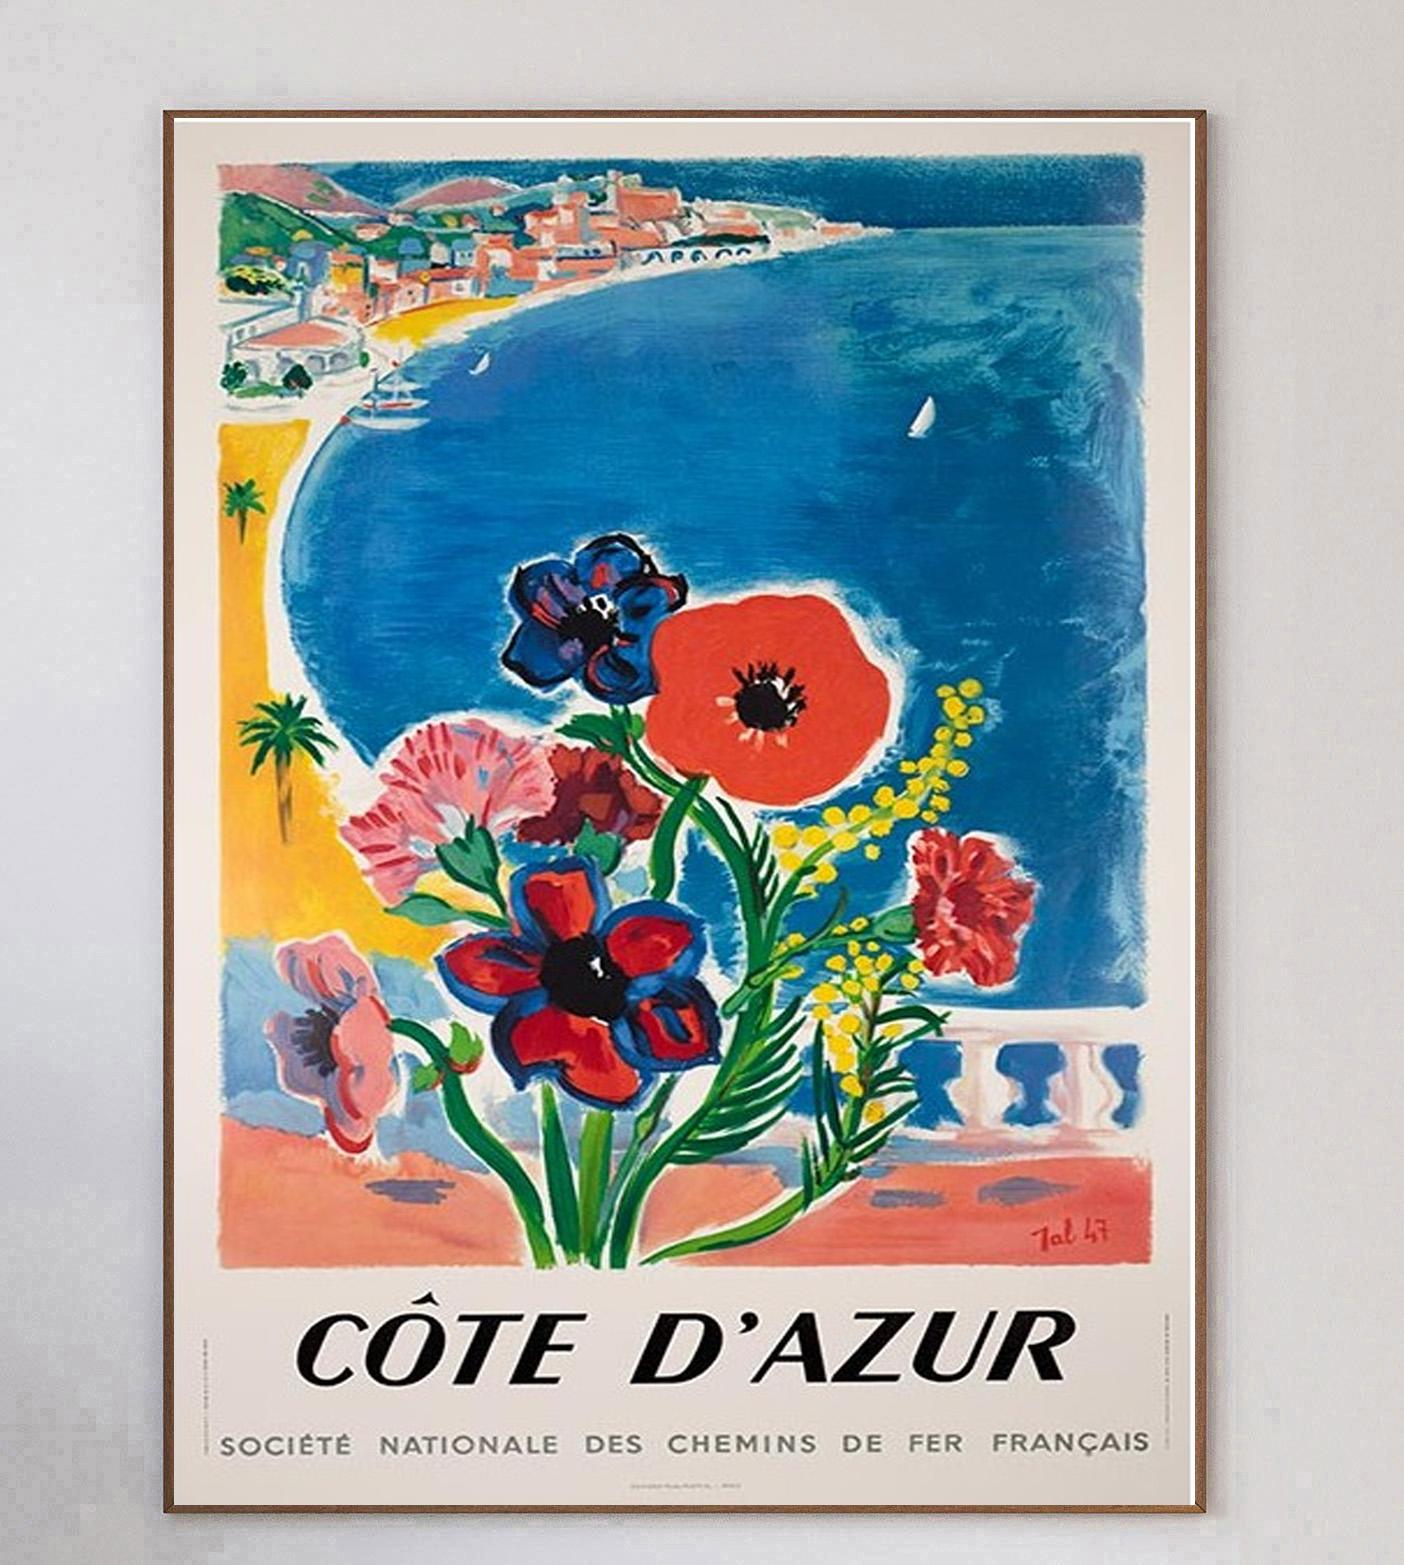 Charming poster from 1970 for the French railway SNCF promoting their routes to the Cote d'Azur in southern France. 

Featuring gorgeous artwork of a sunny scene behind a bunch of flowers, the vibrant piece was designed by artist TAL, originally in